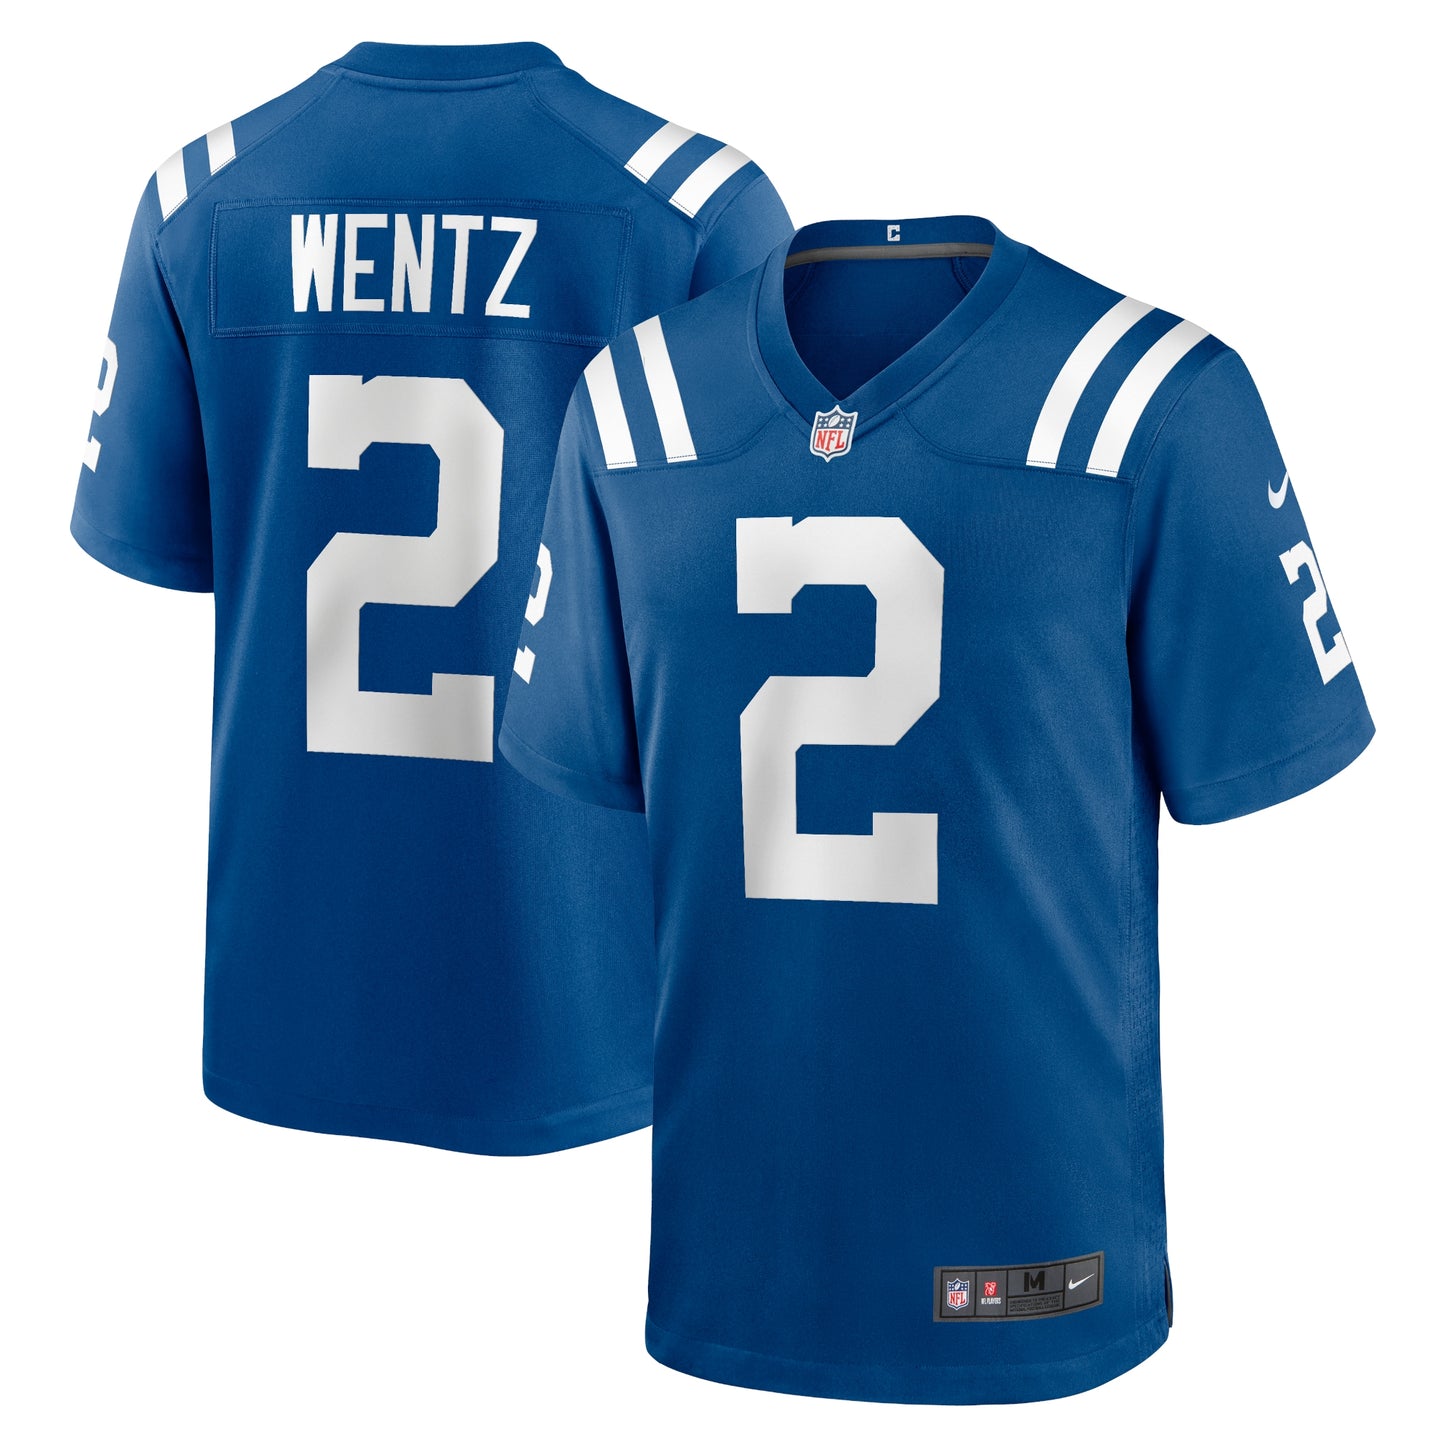 Carson Wentz Indianapolis Colts Nike Youth Game Jersey - Royal